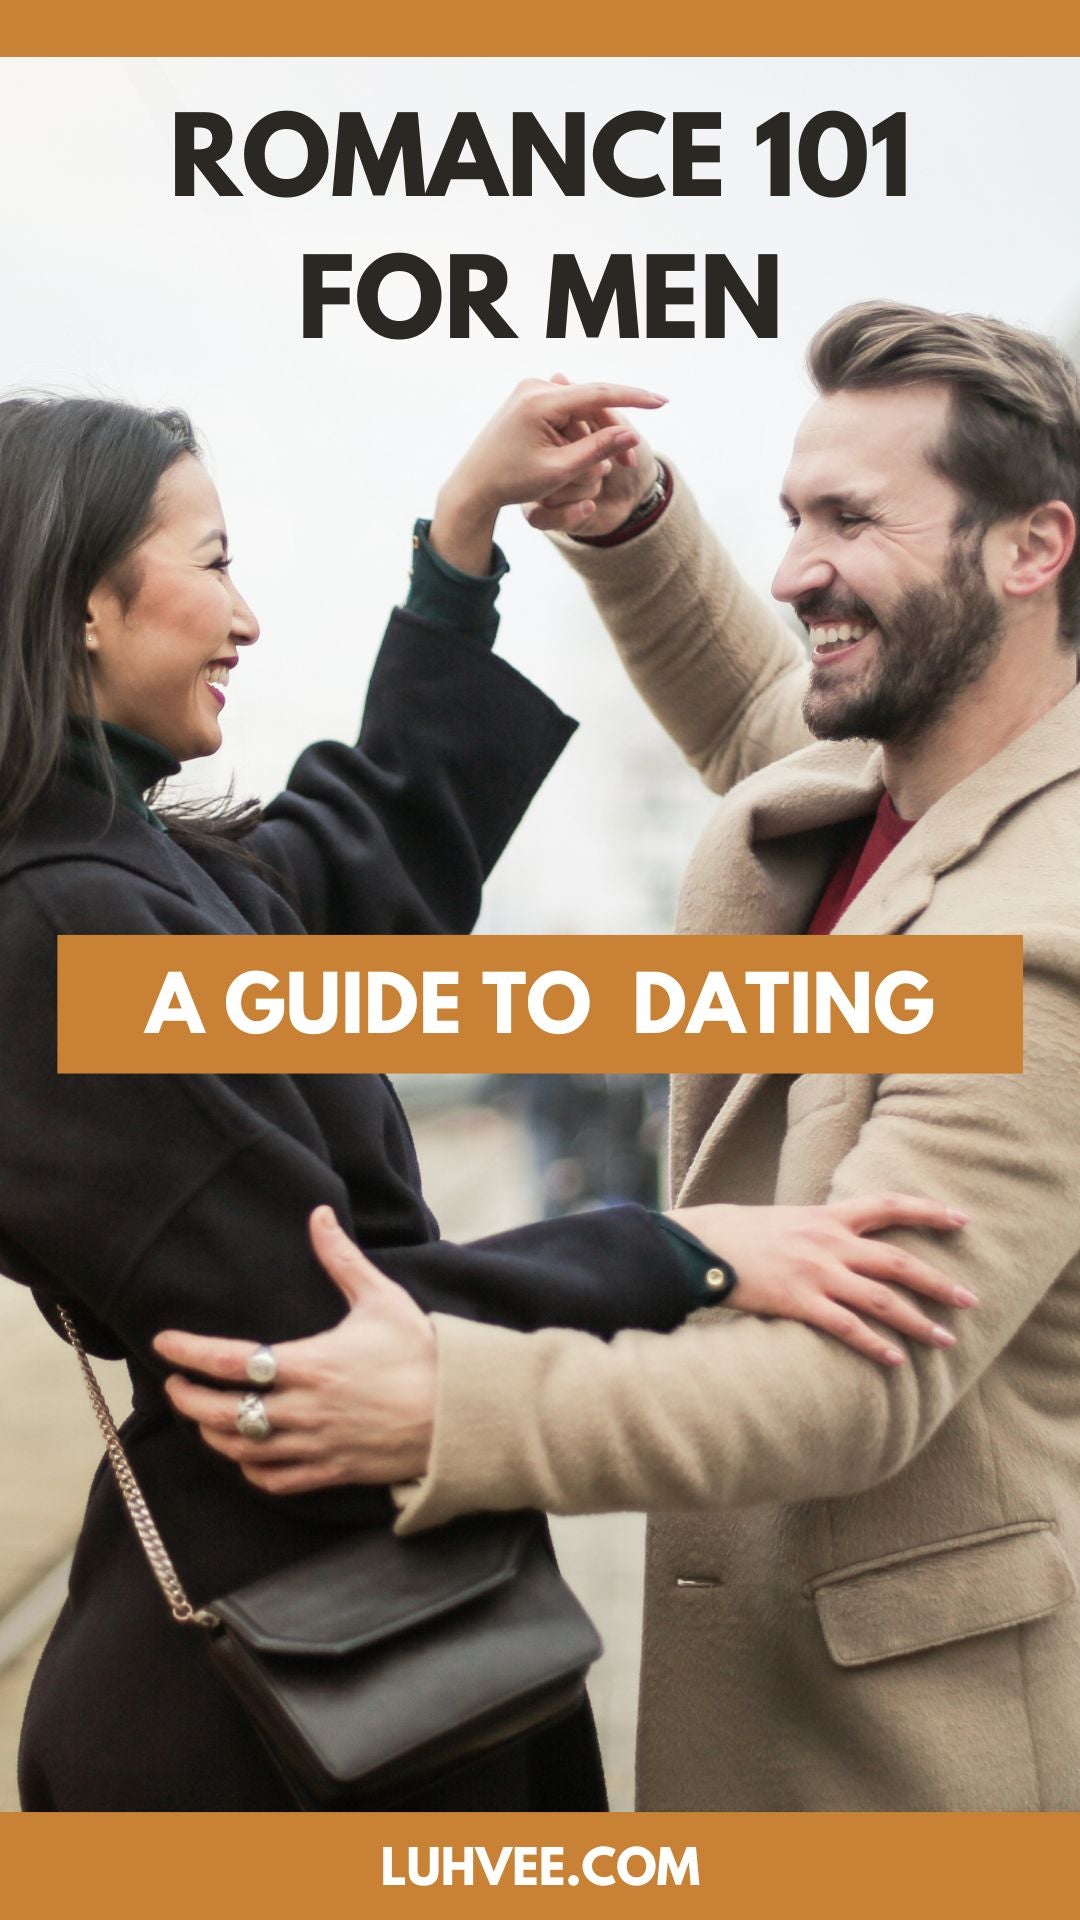 A Guide to Proper Dating